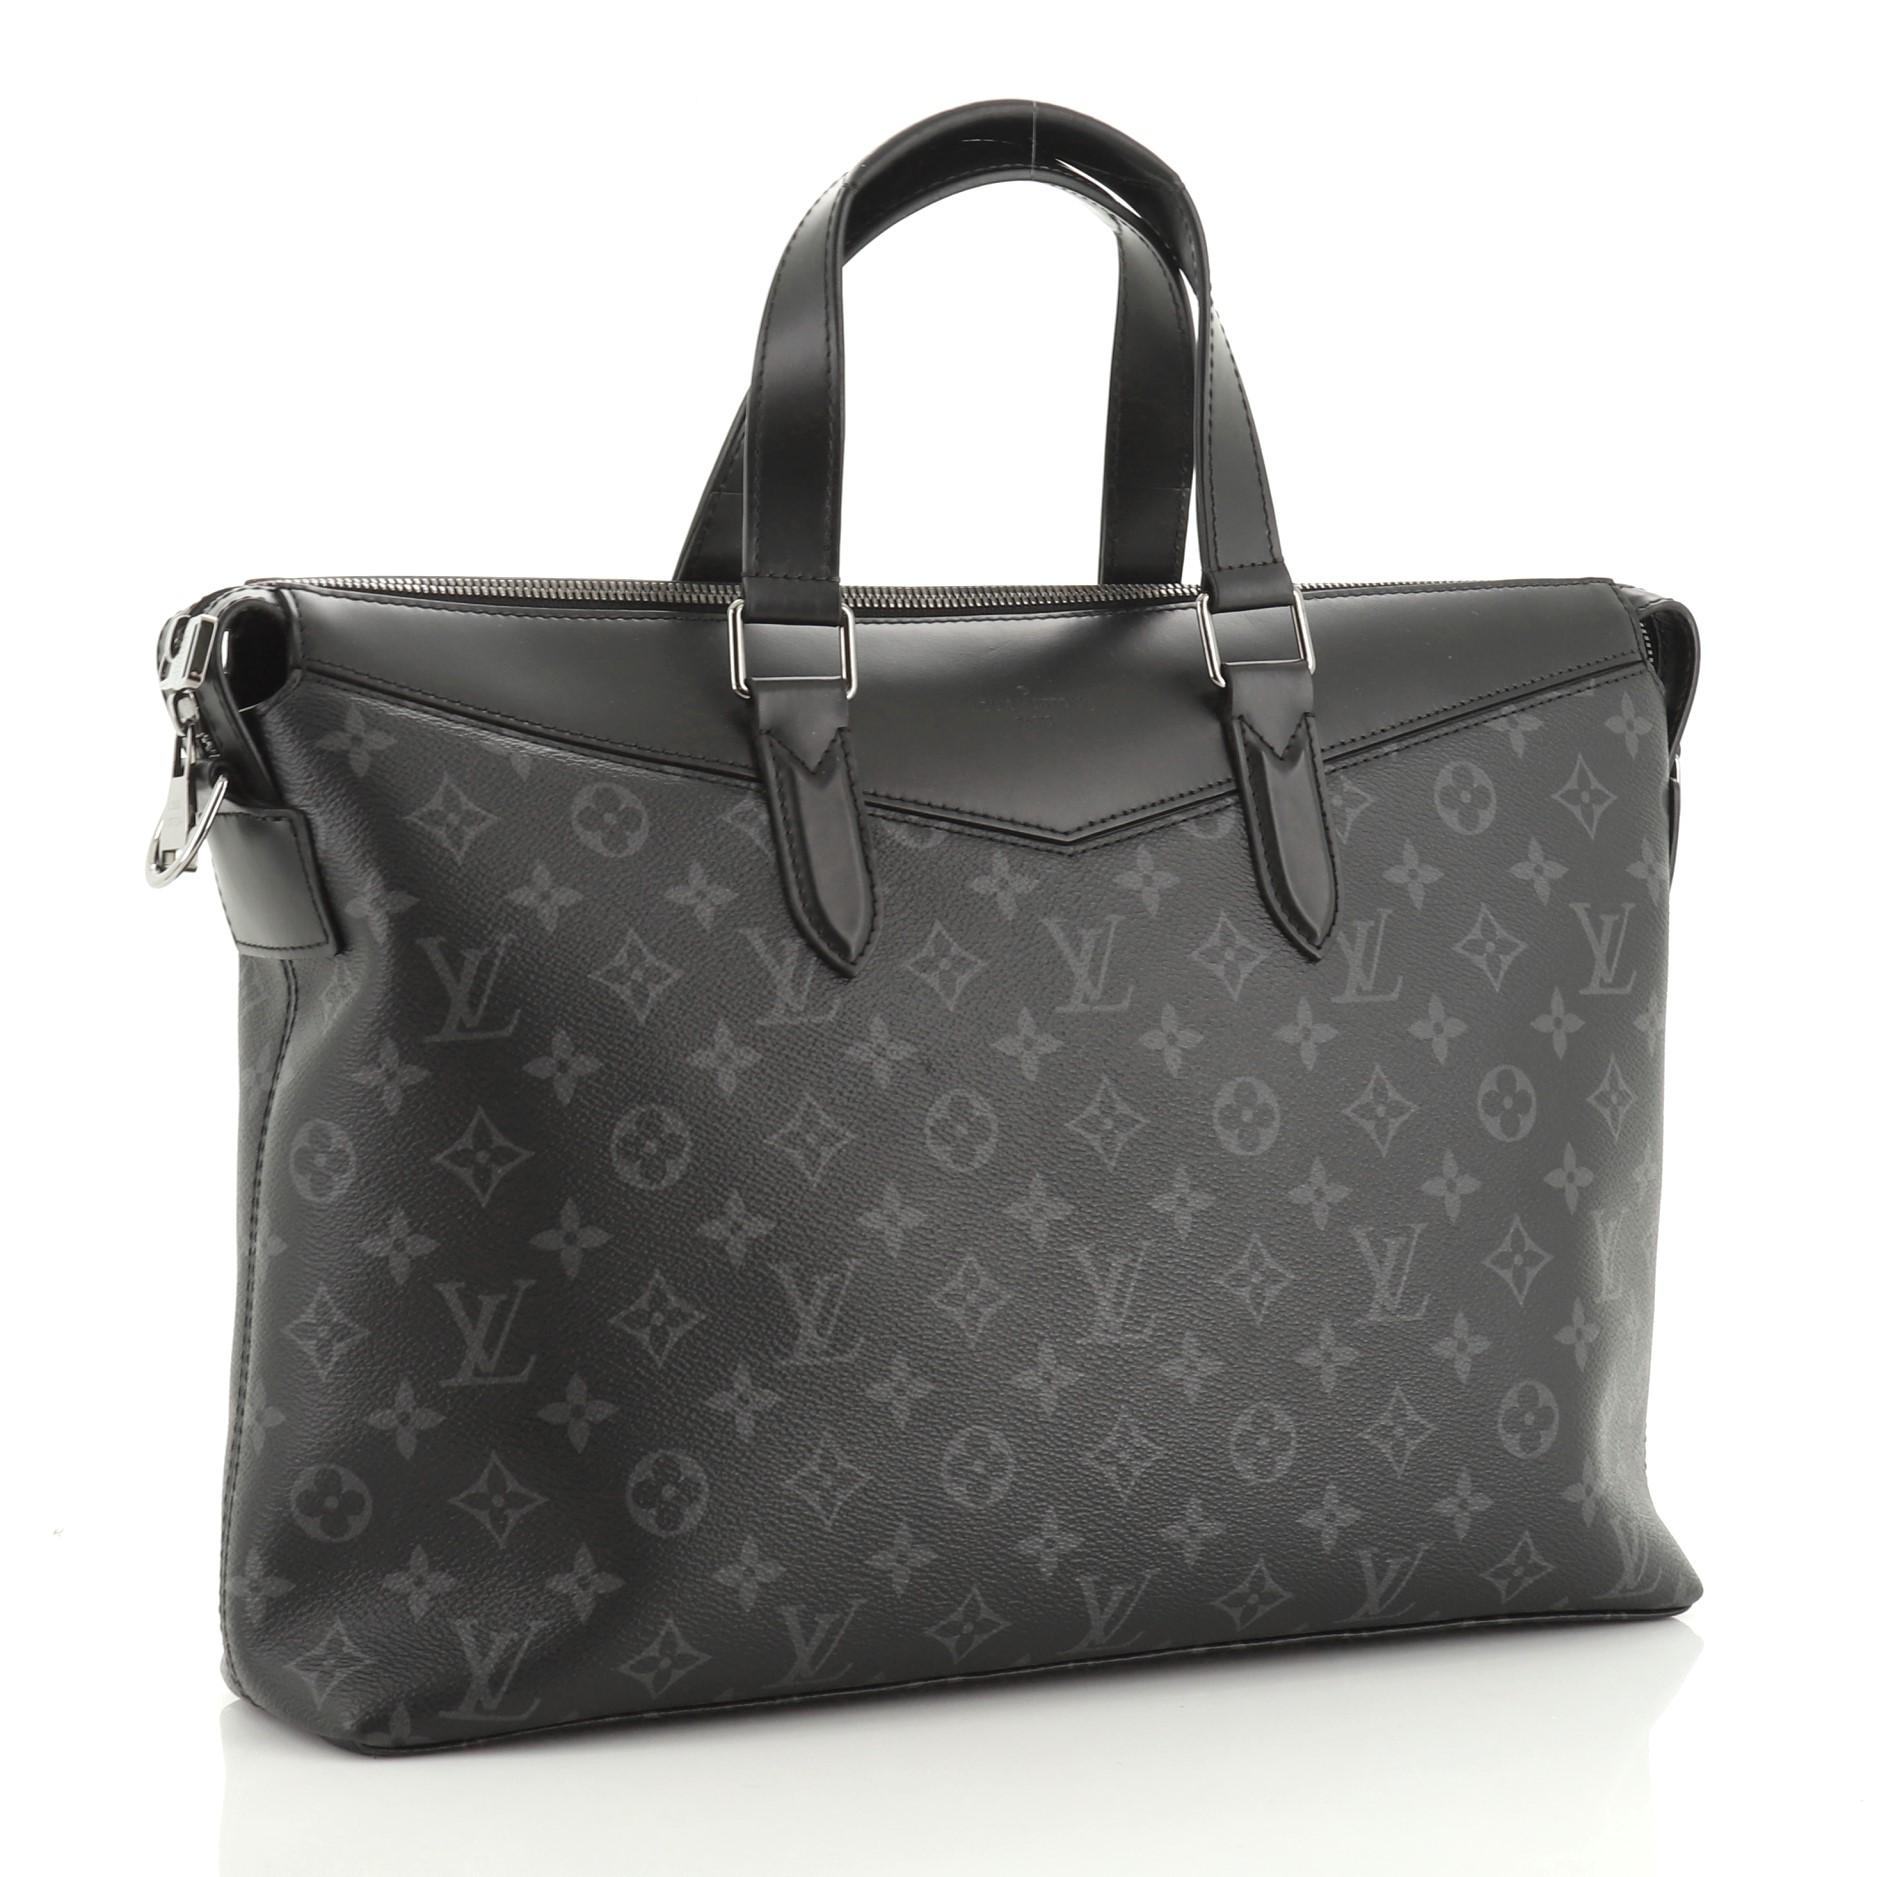 This Louis Vuitton Explorer Briefcase Monogram Eclipse Canvas, crafted in black monogram eclipse coated canvas, features dual flat leather handles, adjustable shoulder strap, leather trim, and gunmetal-tone hardware. Its zip closure opens to a black